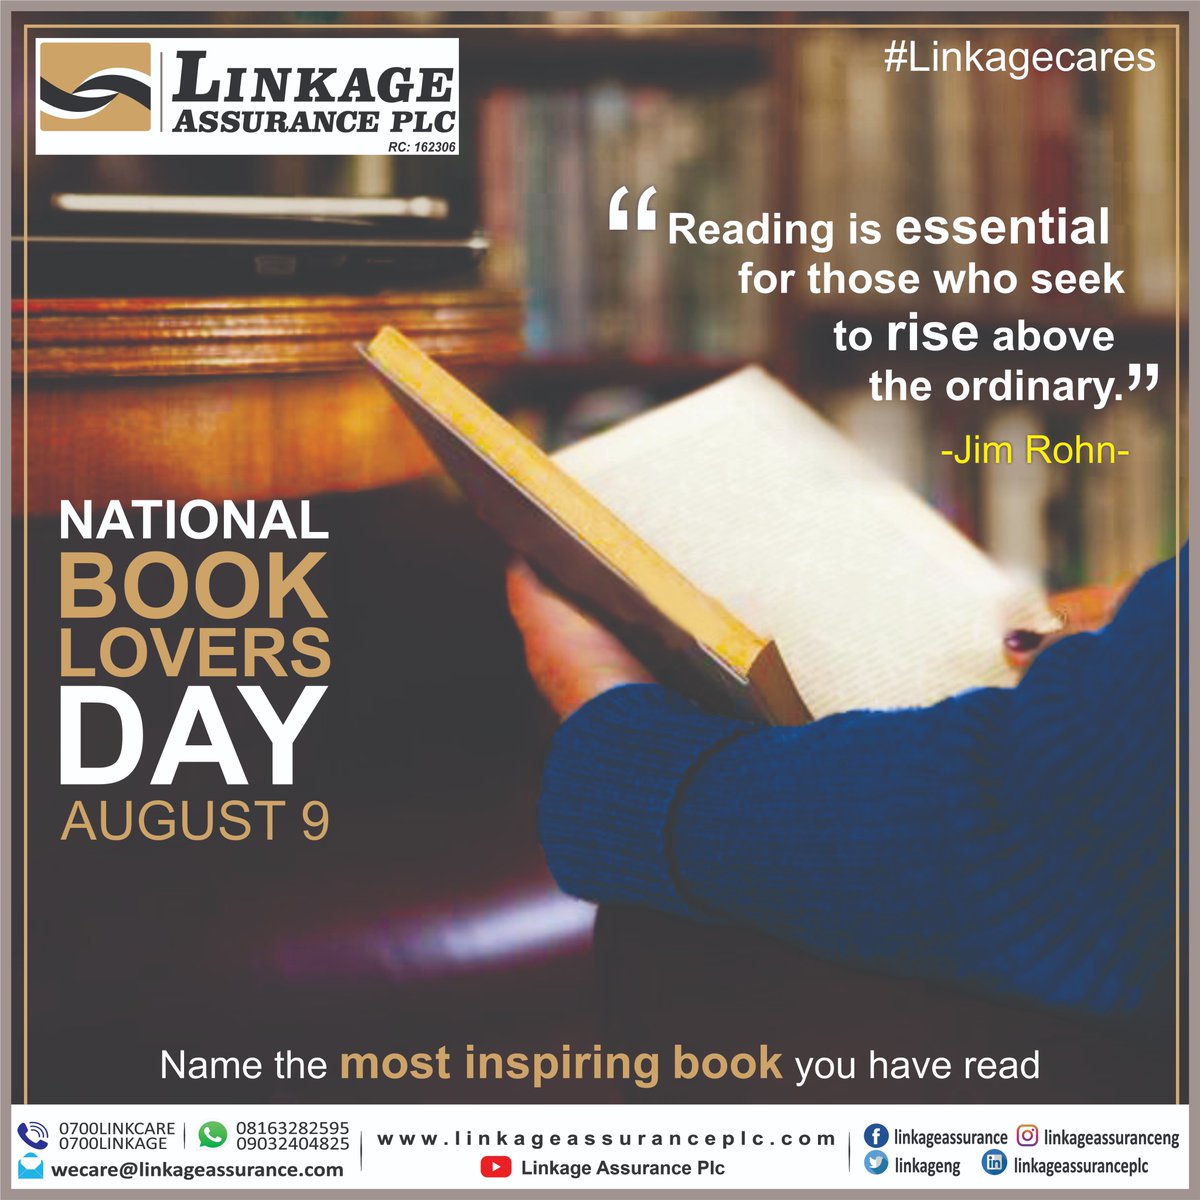 It's National Book Lovers Day!

Name the most inspiring book you have read. Let us know in the comment section.

'Reading is essential for those who seek to rise above the ordinary' -Jim Rohn-

#NationalBookLoversDay #Education #Library #Readers #Books #Booklovers #Digitalbooks